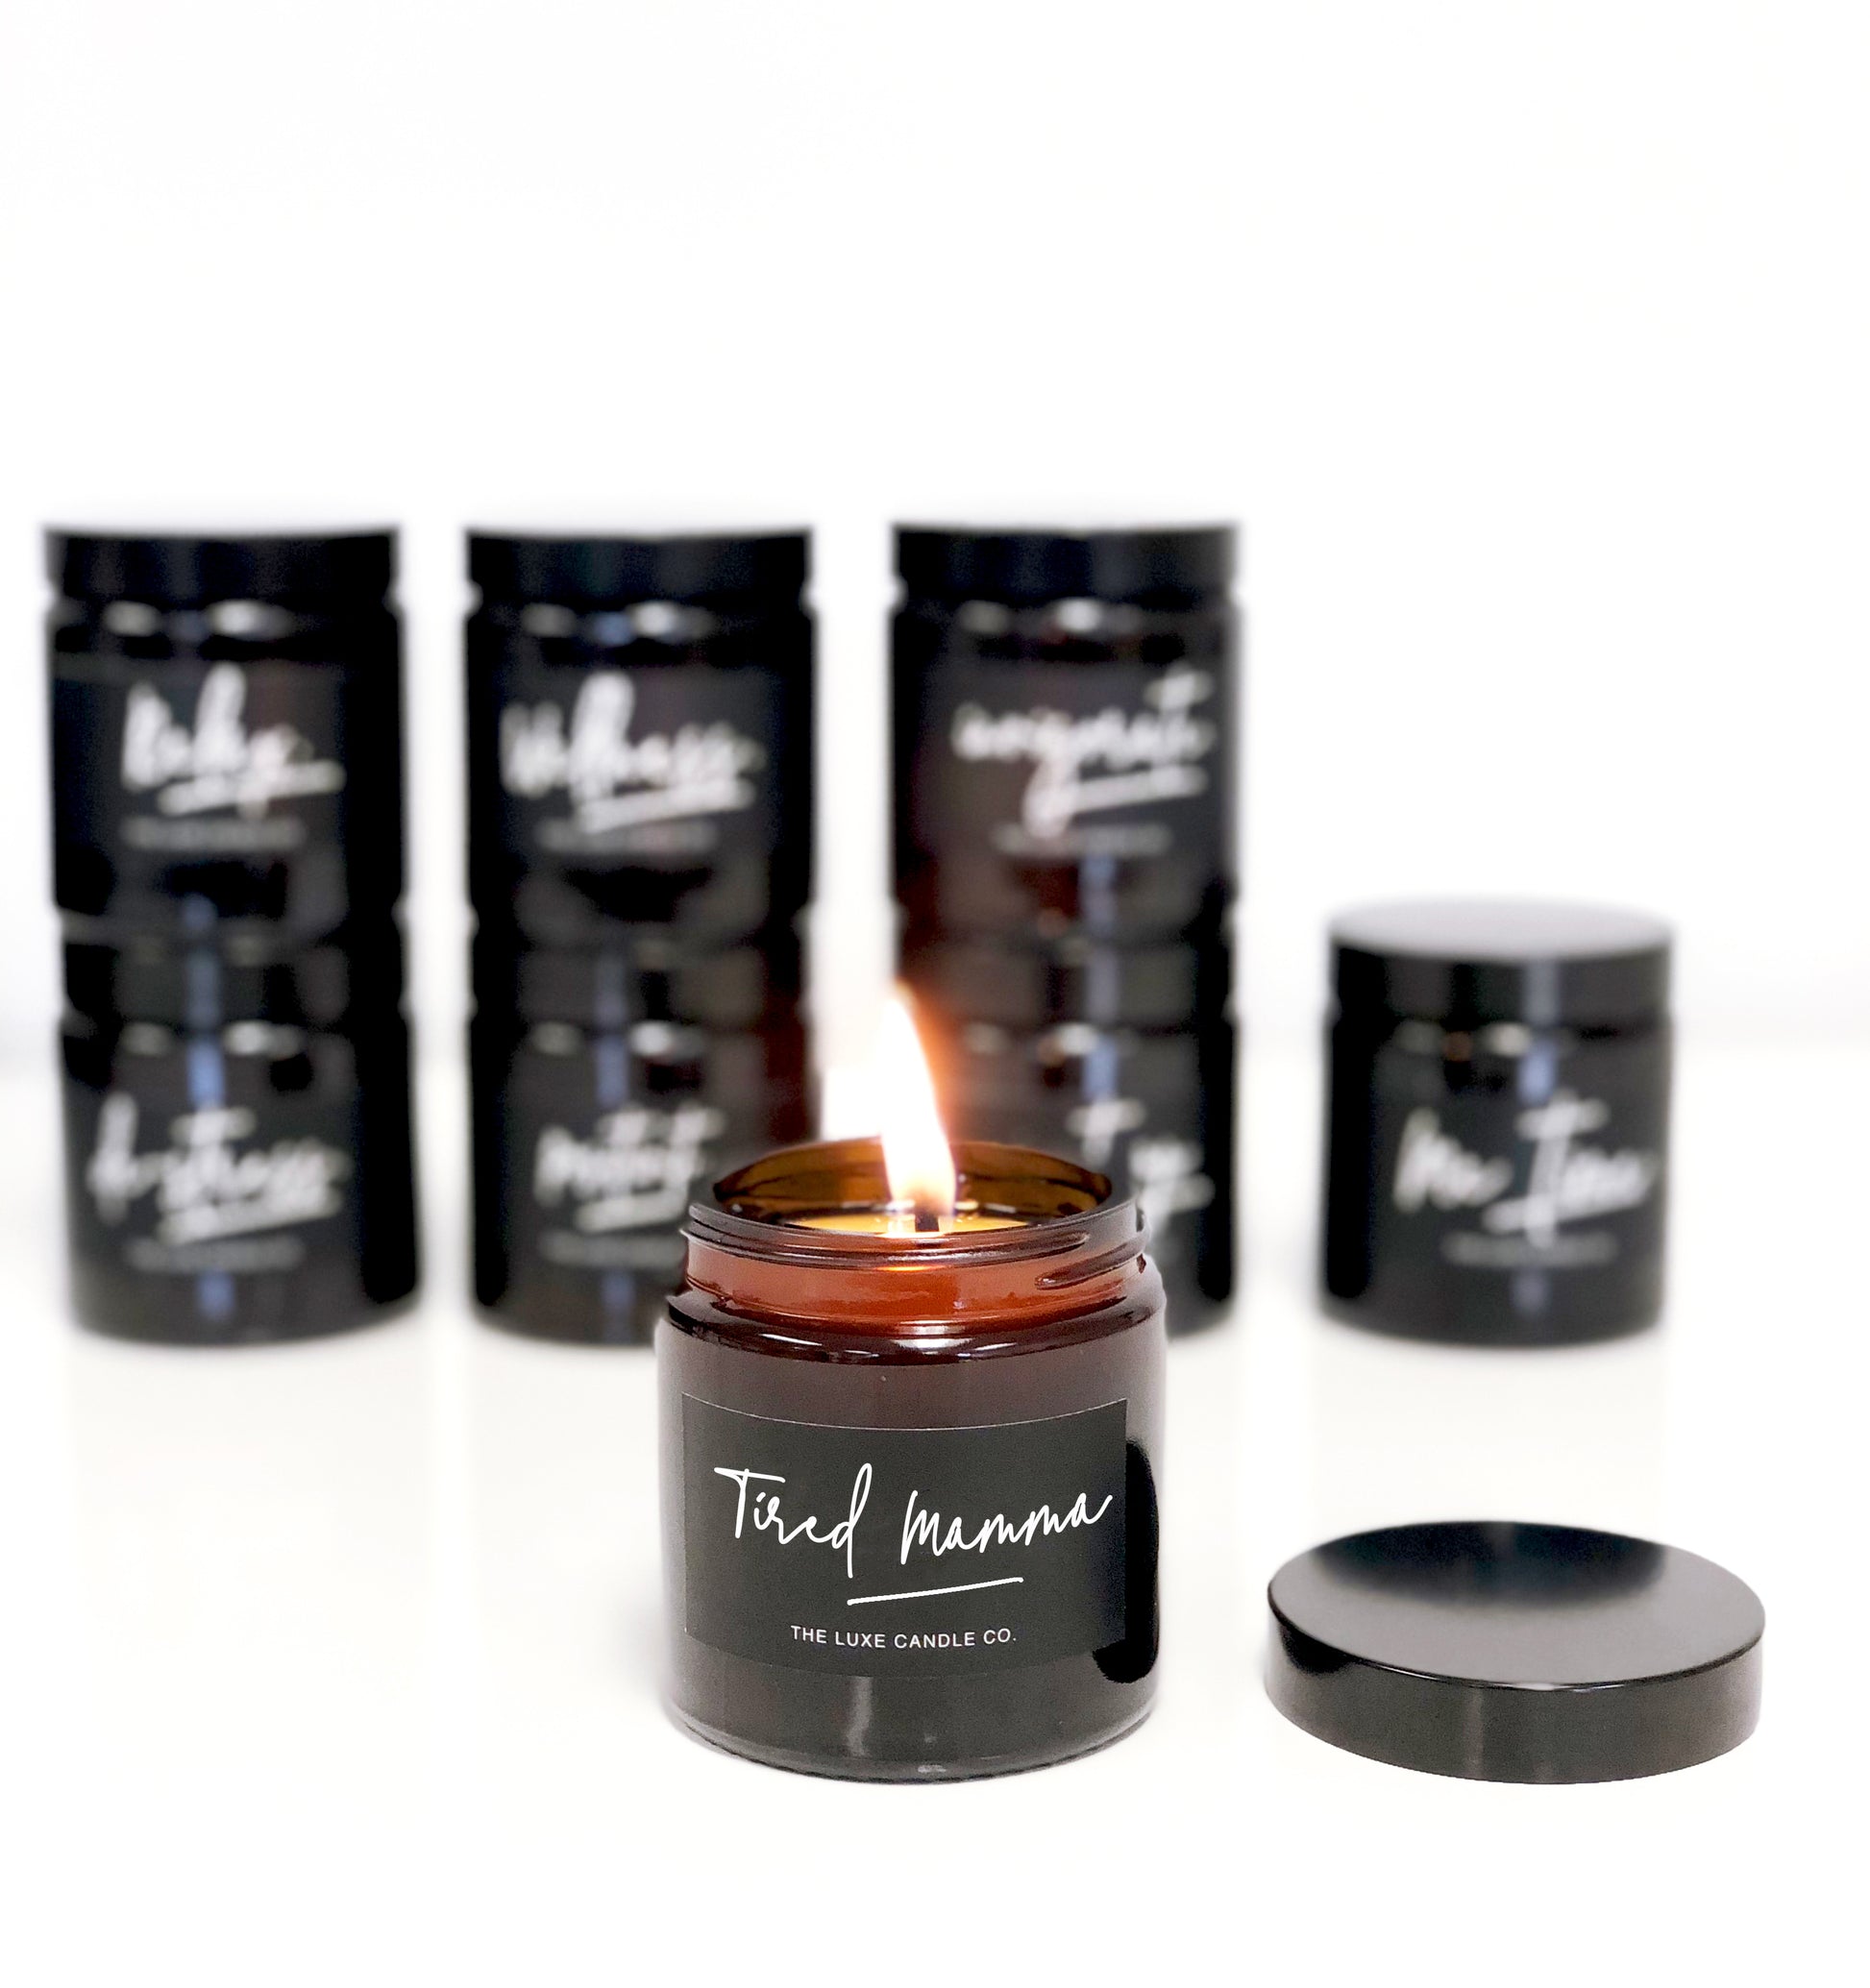 Tired Mamma Candles - Soy wax candle with lavender essential oils for tired mammas